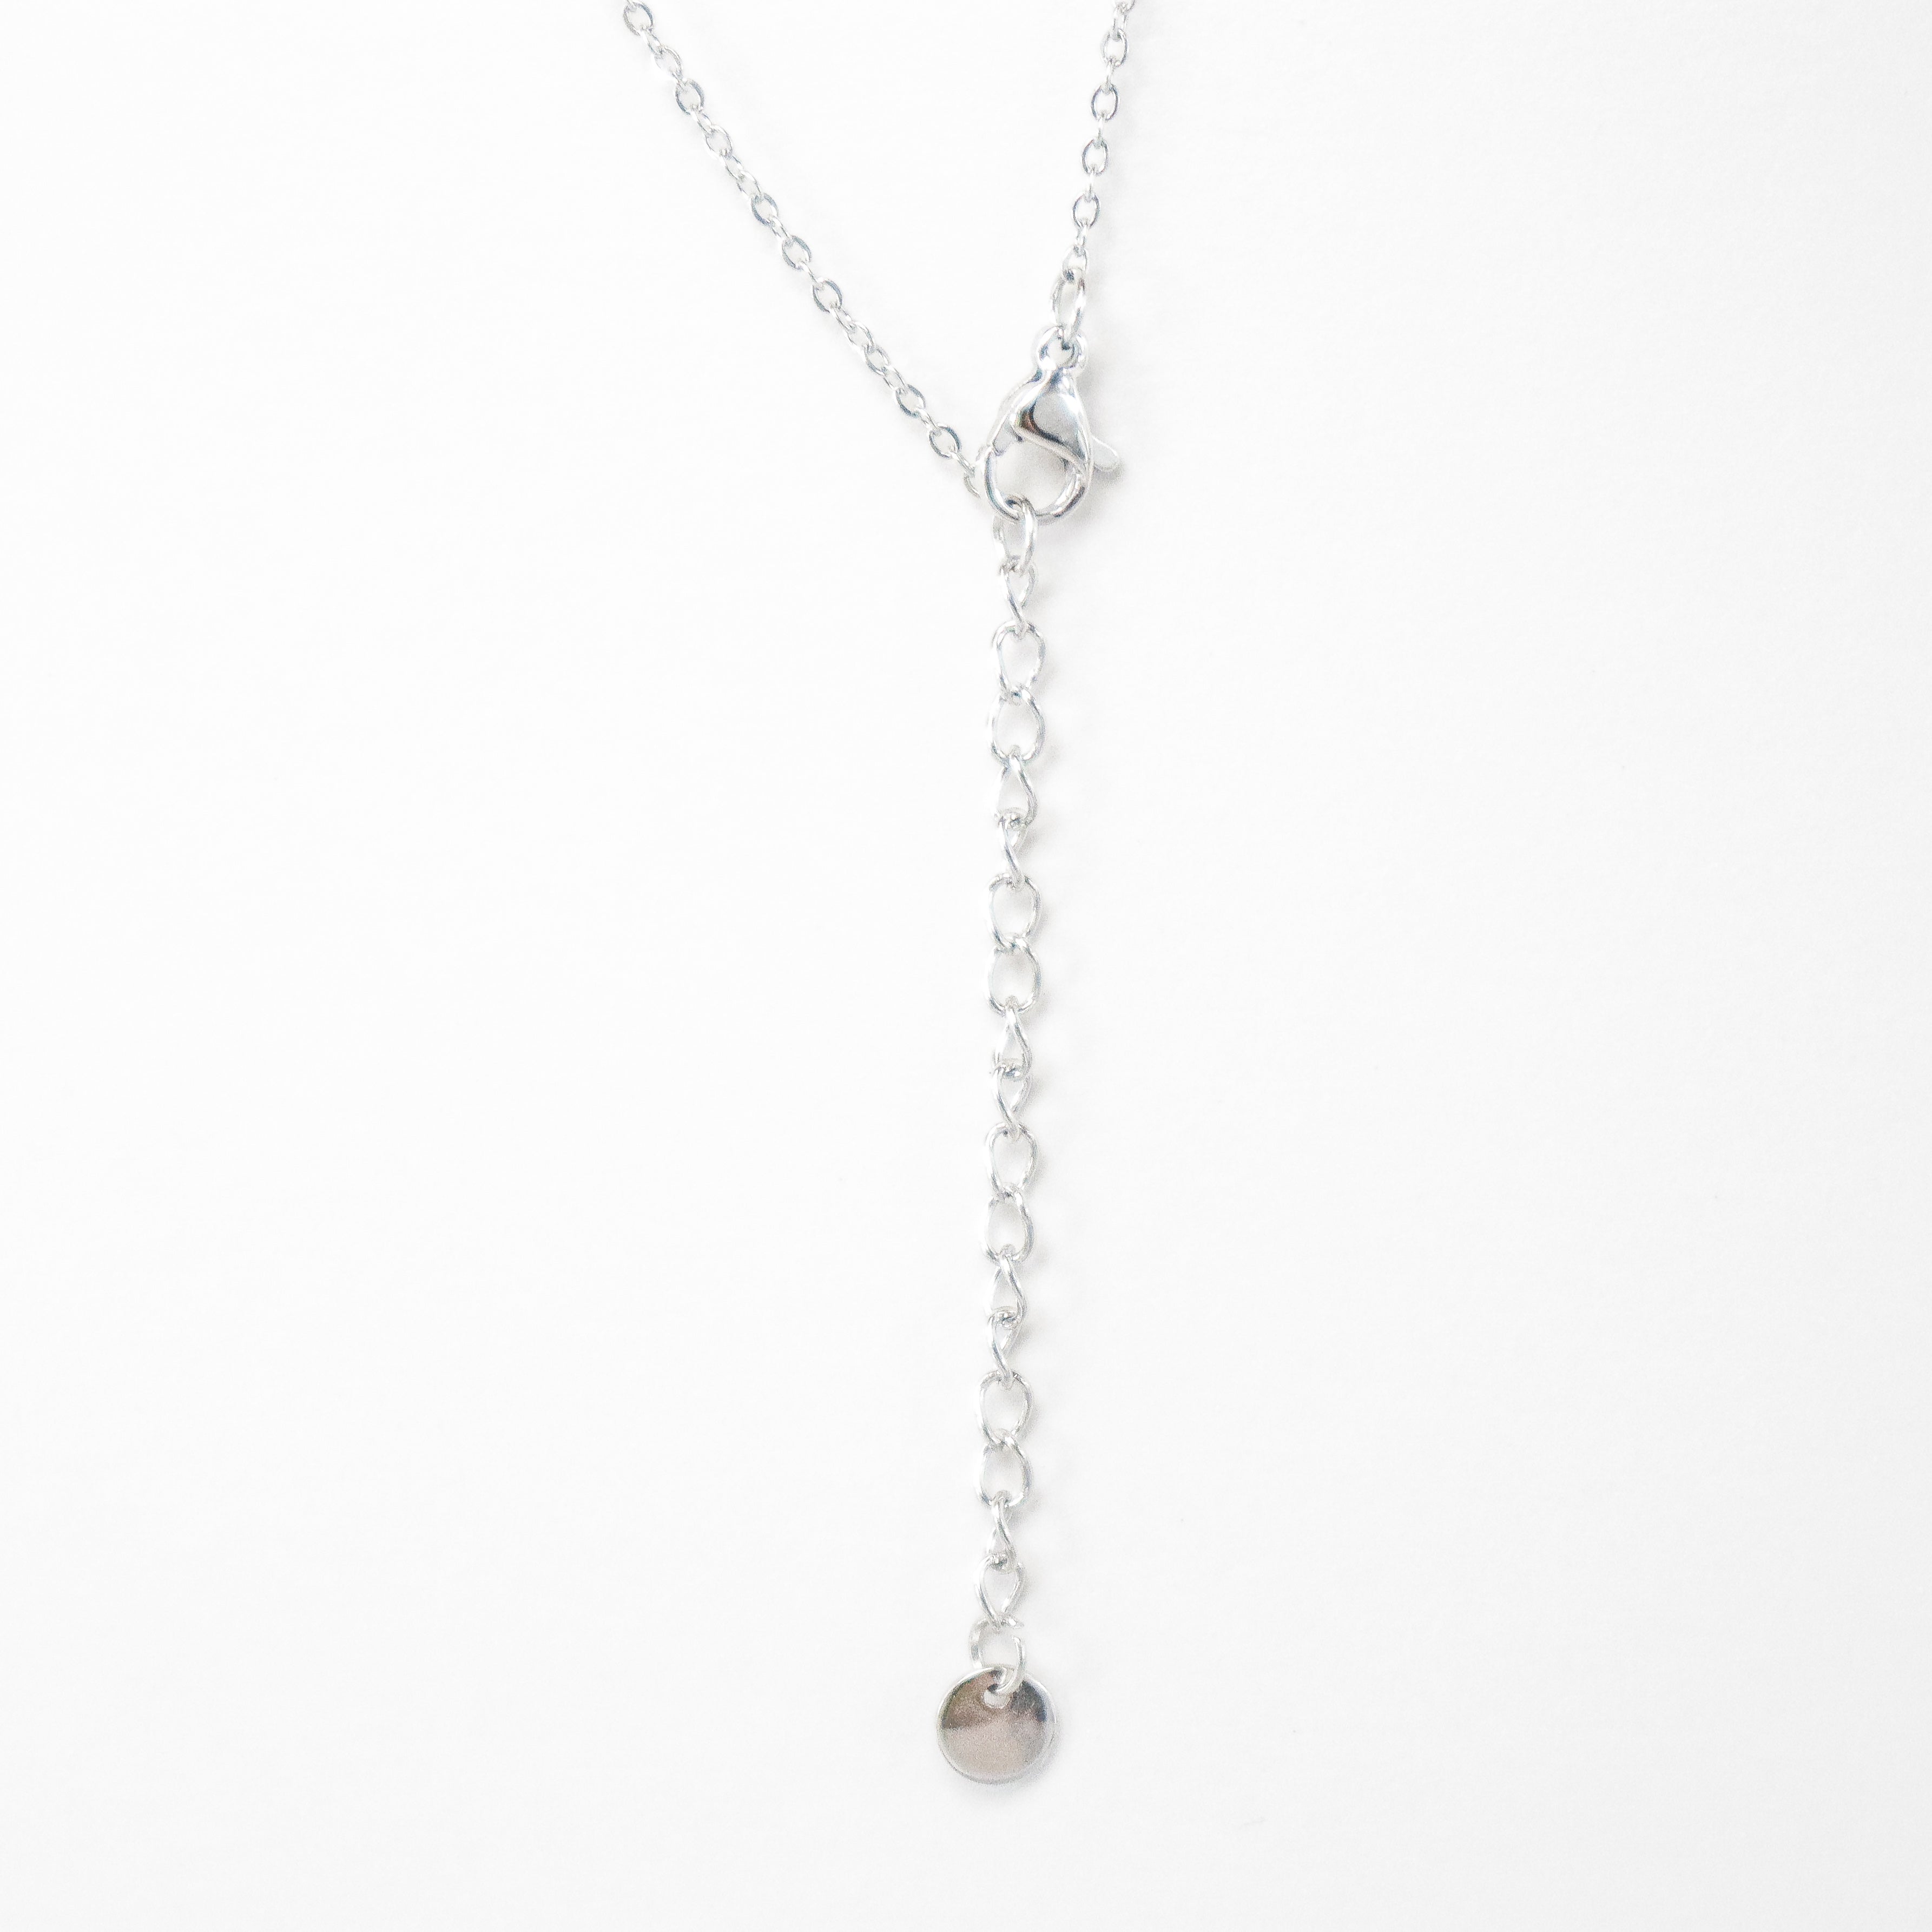 Reversible Dainty Silver Star Necklace